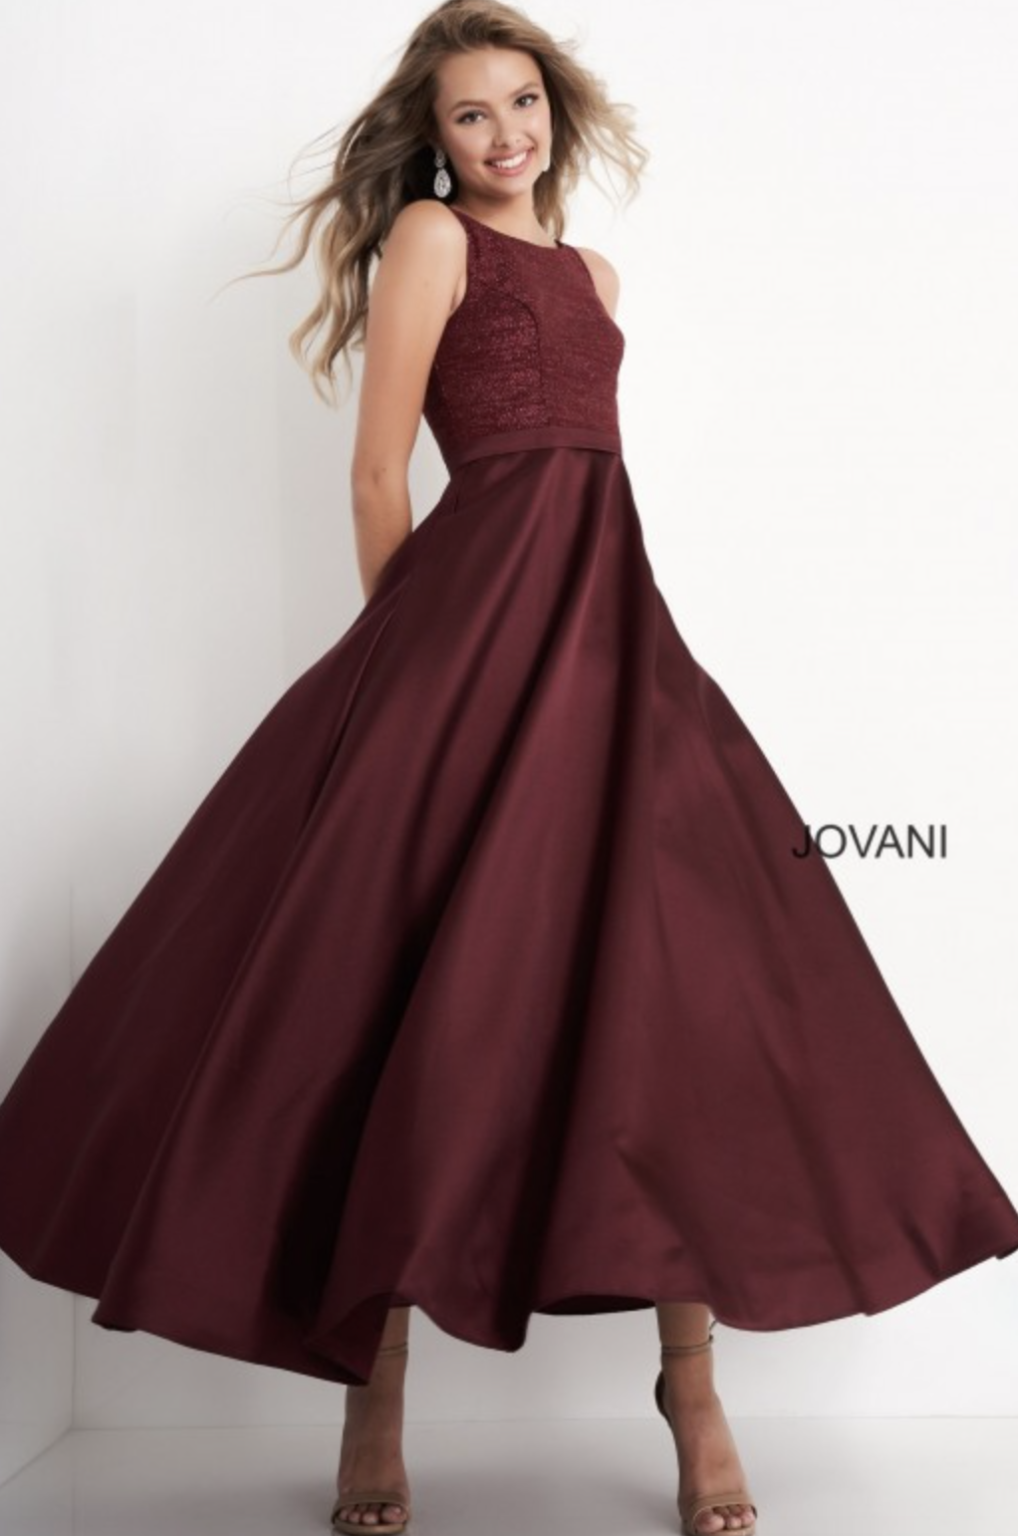 Top Modest Prom Dresses of 2021